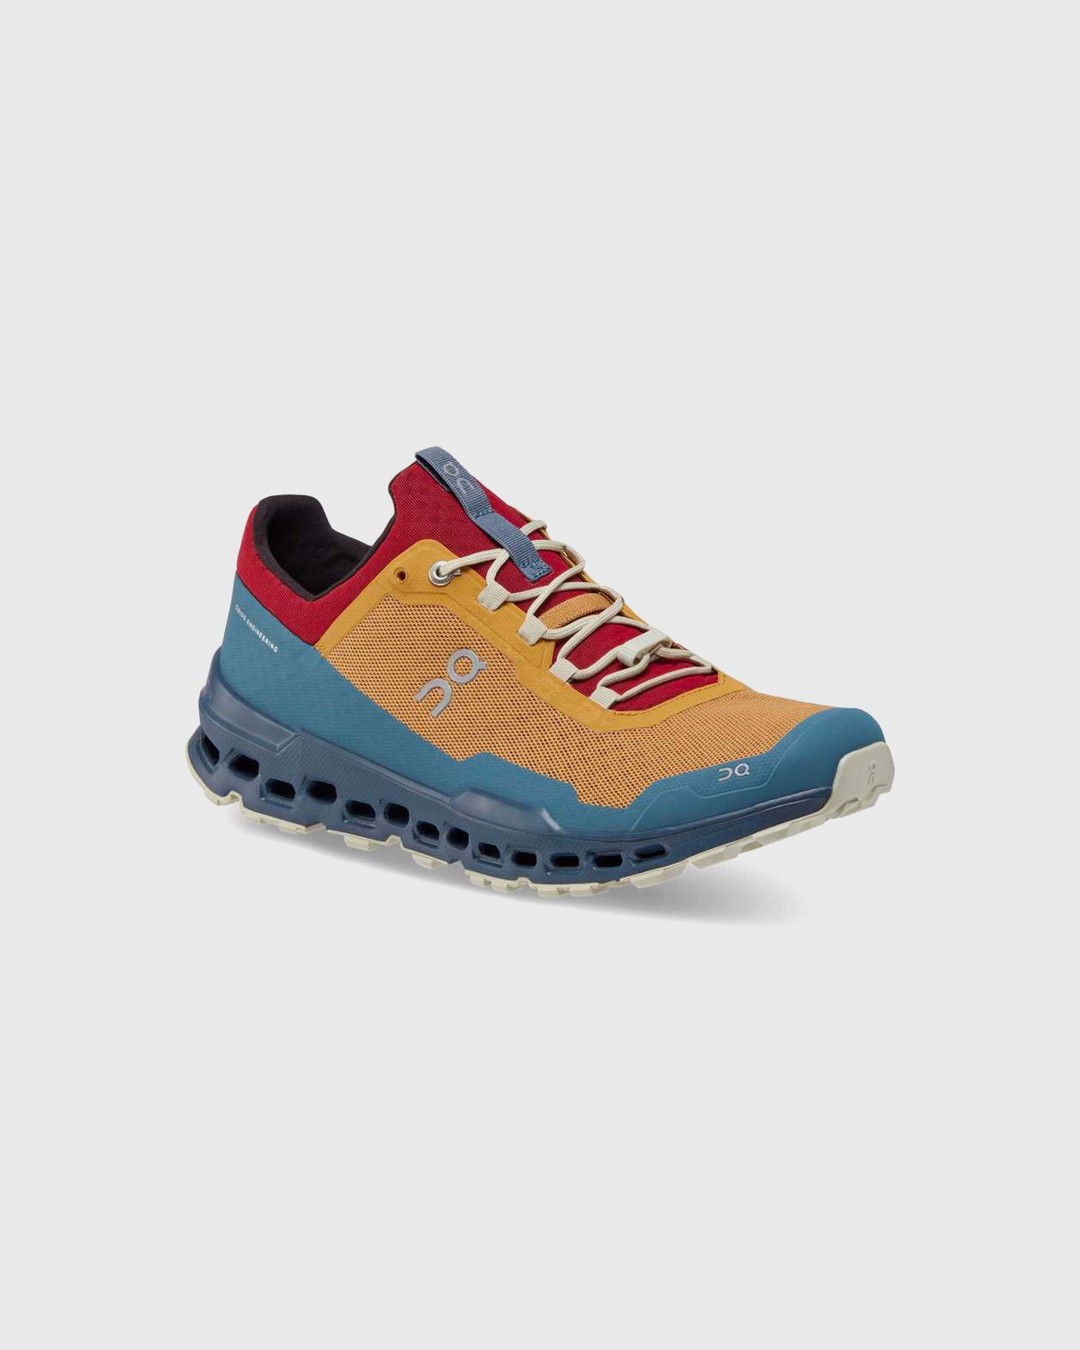 On – Cloudultra Bronze/Navy - Sneakers - Multi - Image 3